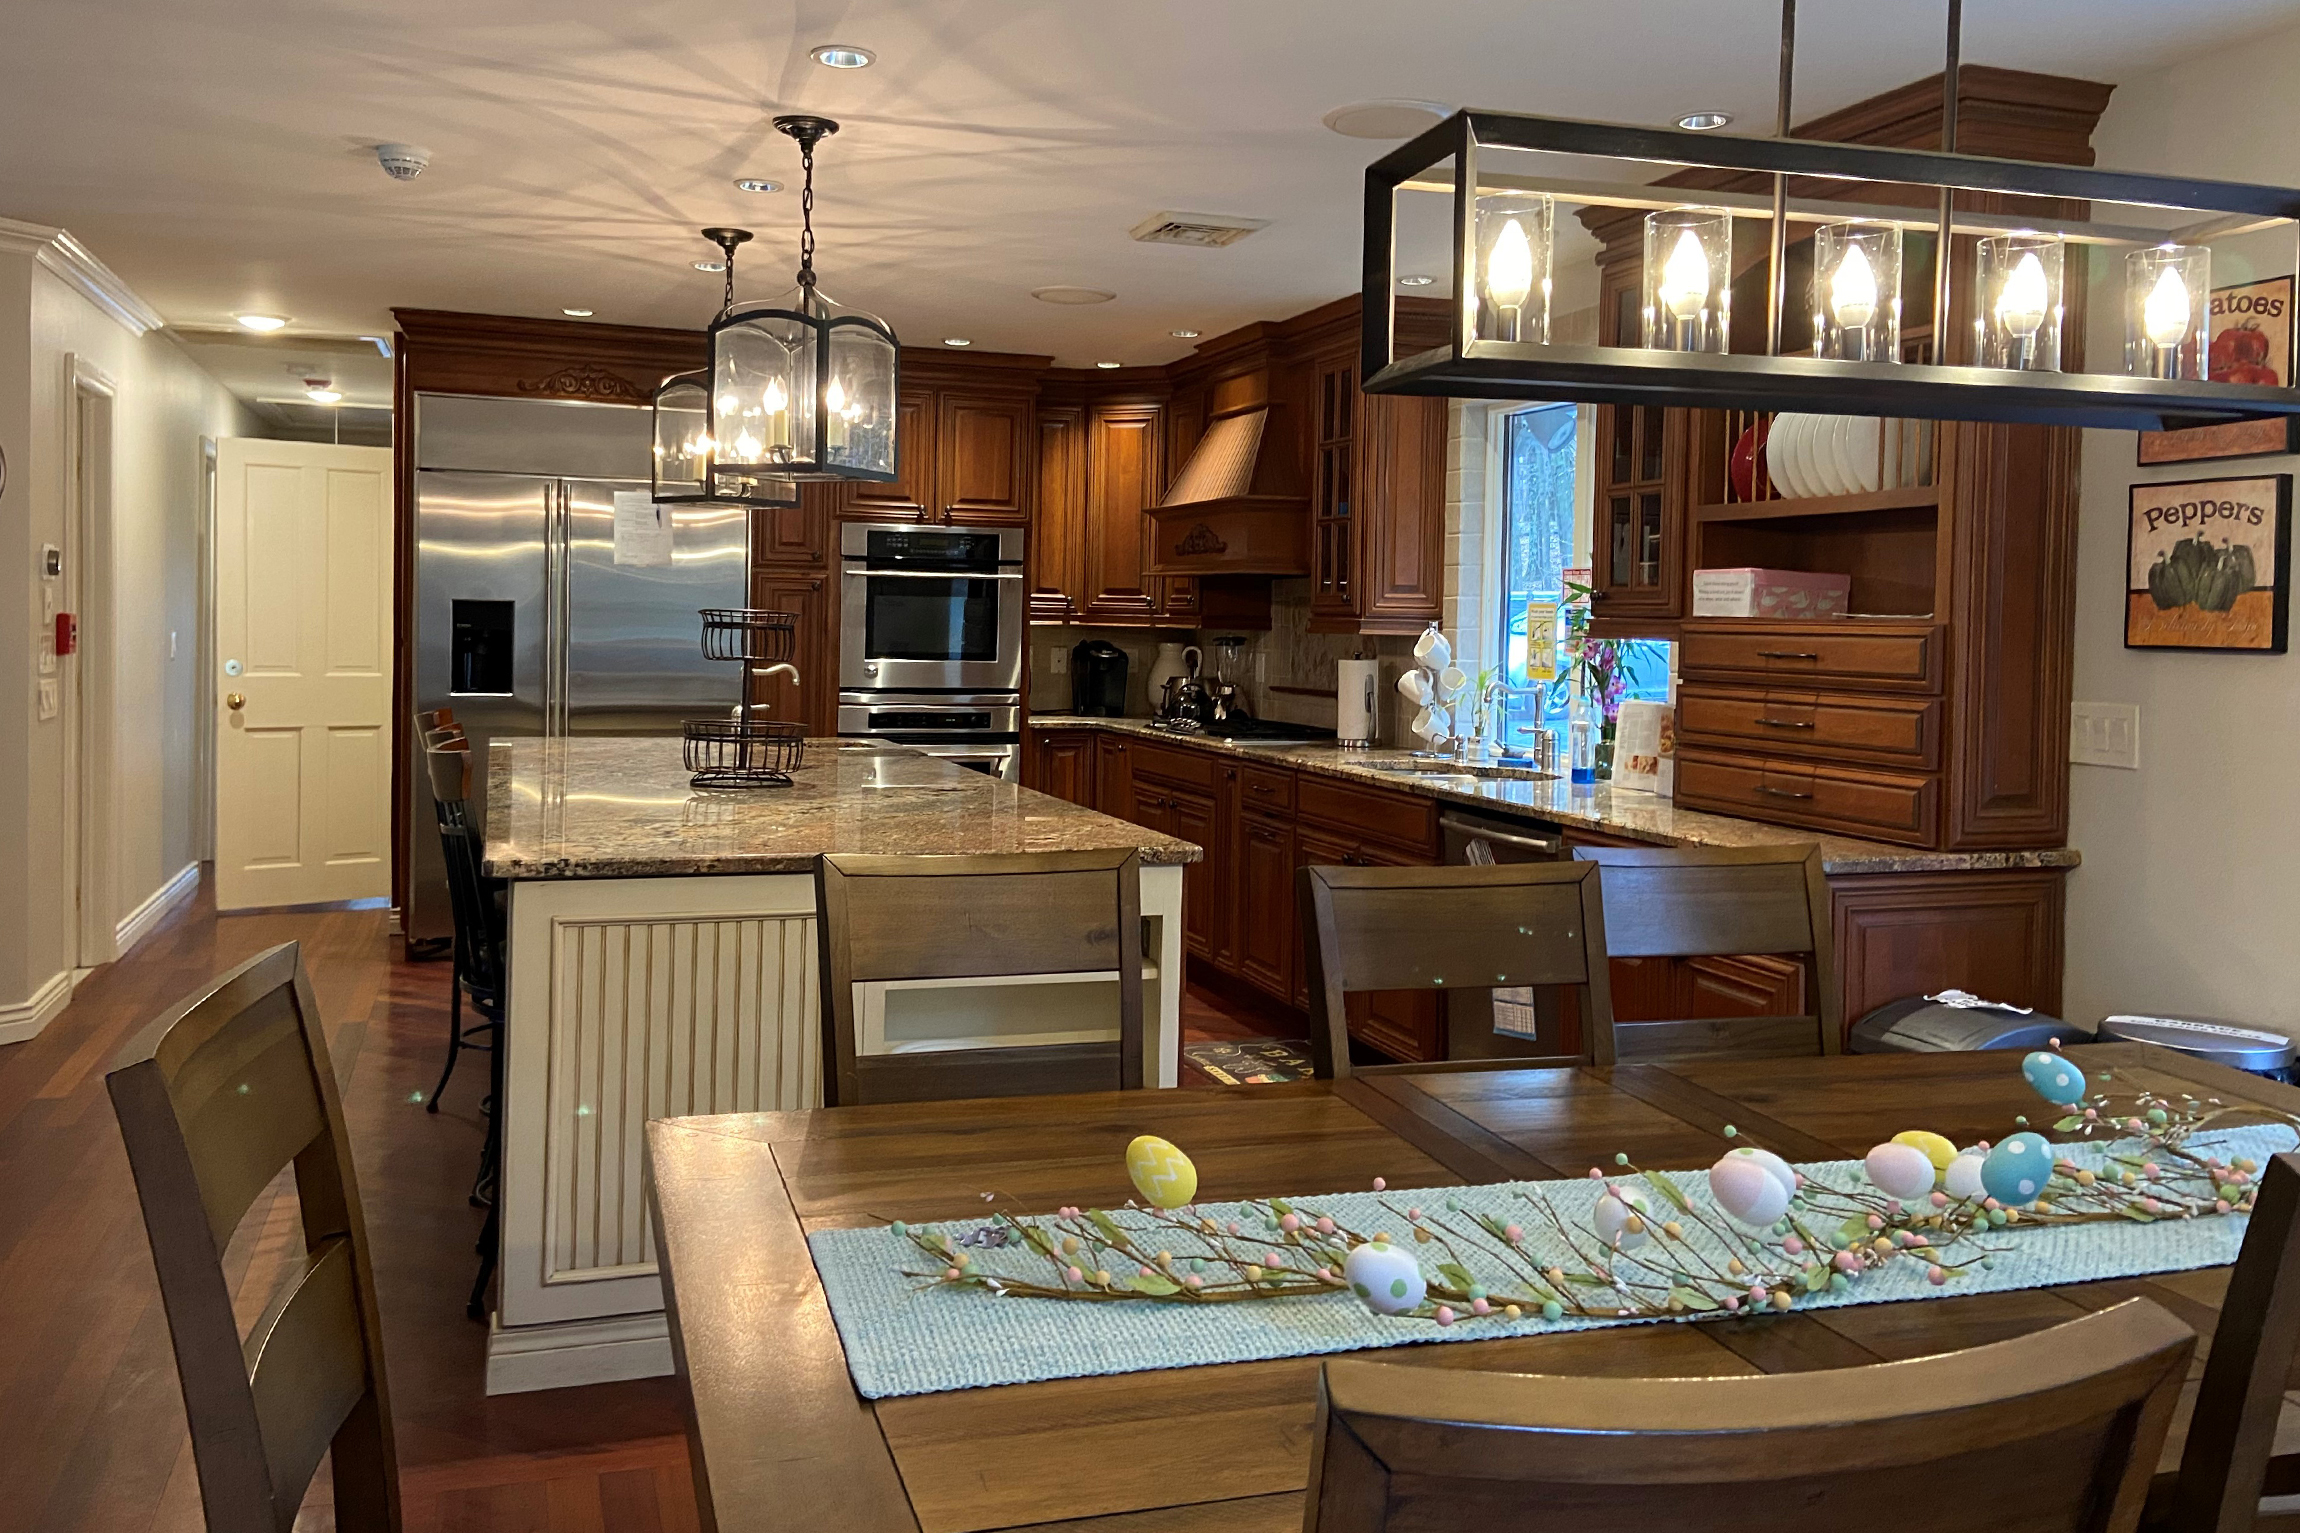 The Life Skills Center provides a home-like atmosphere in the kitchen and dining area.